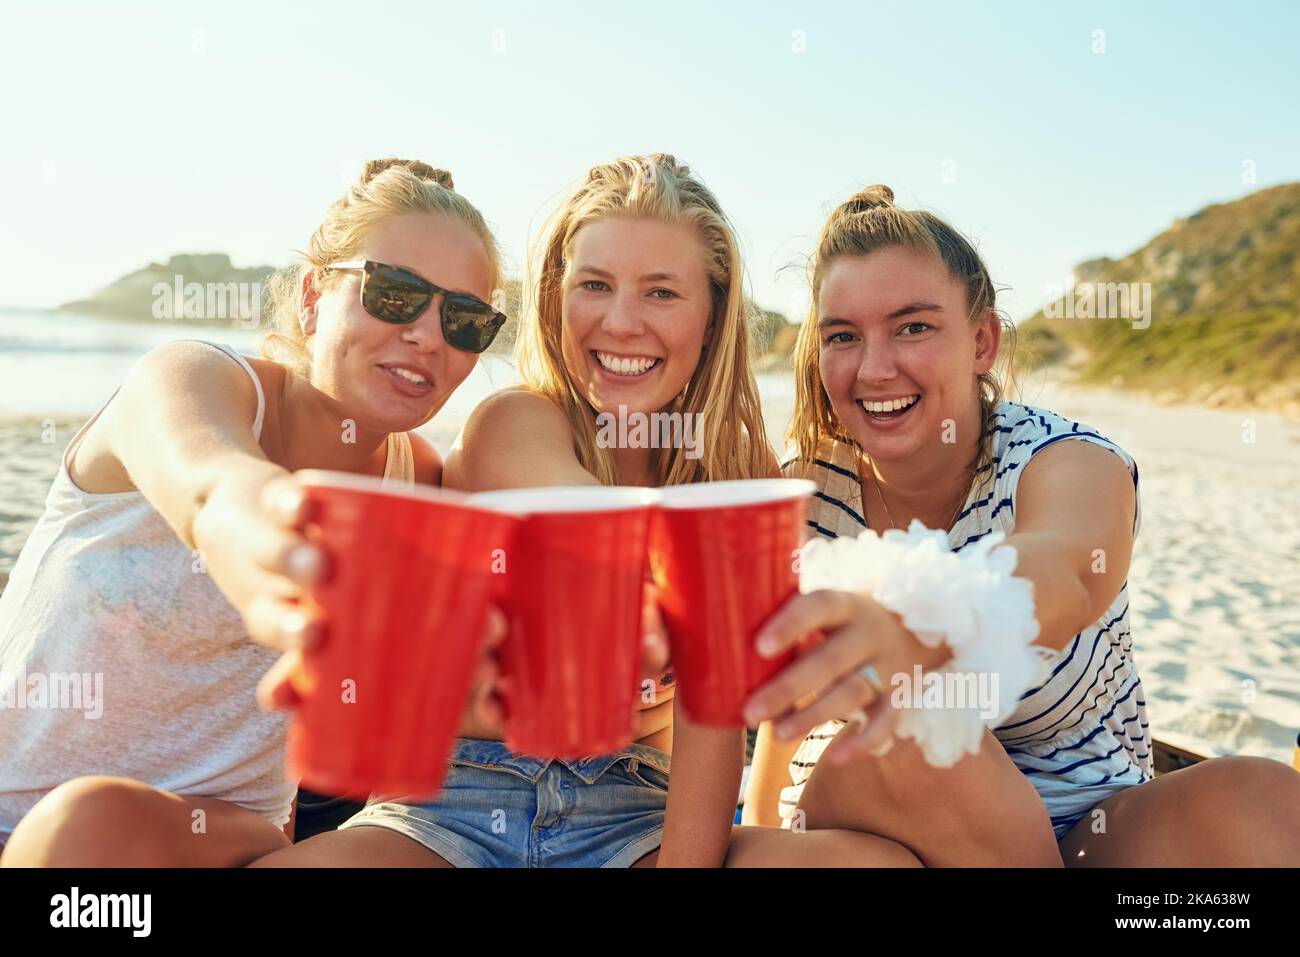 Celebrating our friendship. young female best friends hanging out at the beach. Stock Photo